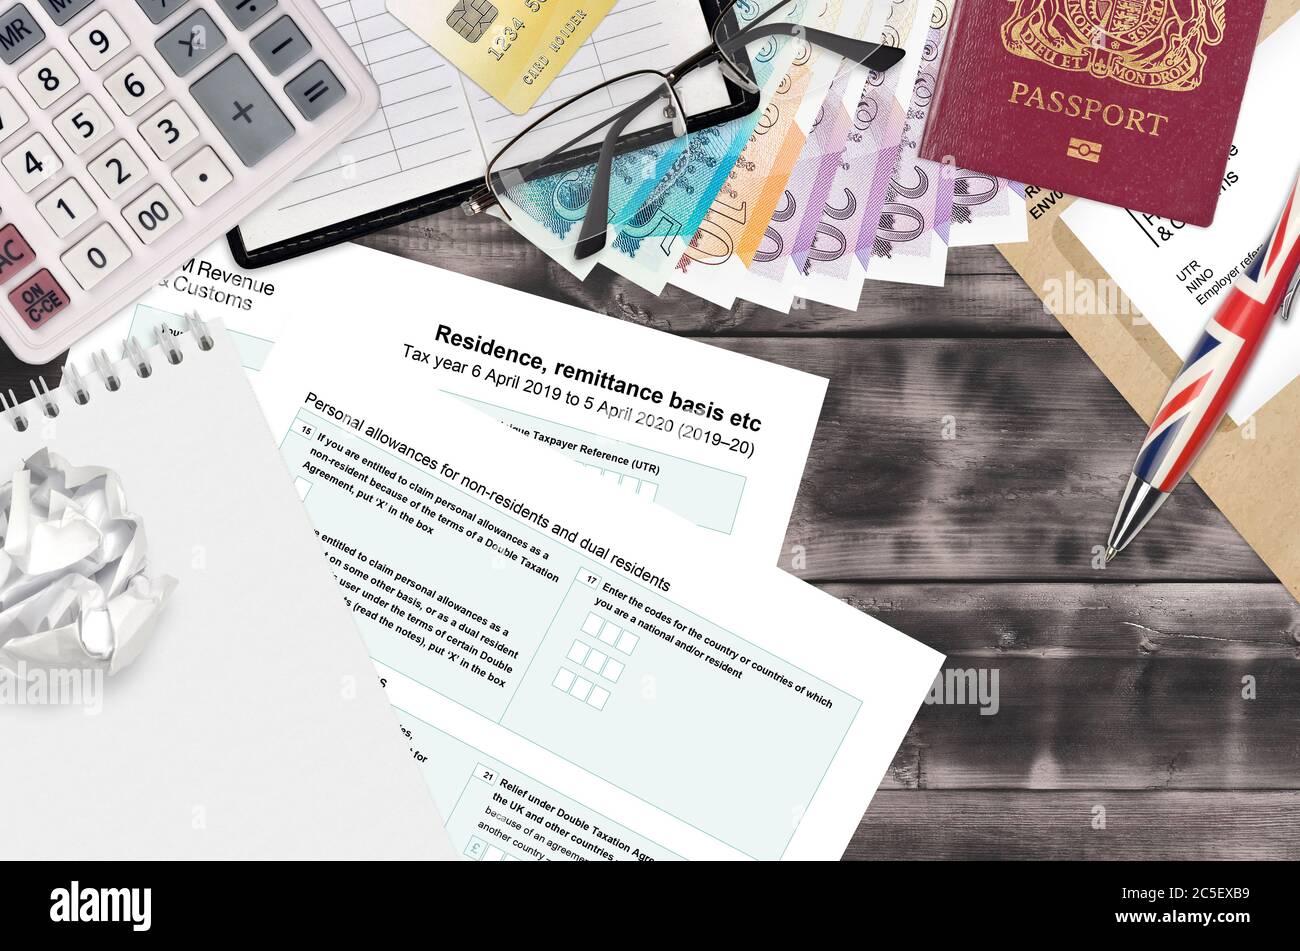 english-tax-form-sa108-residence-remittance-basis-etc-from-hm-revenue